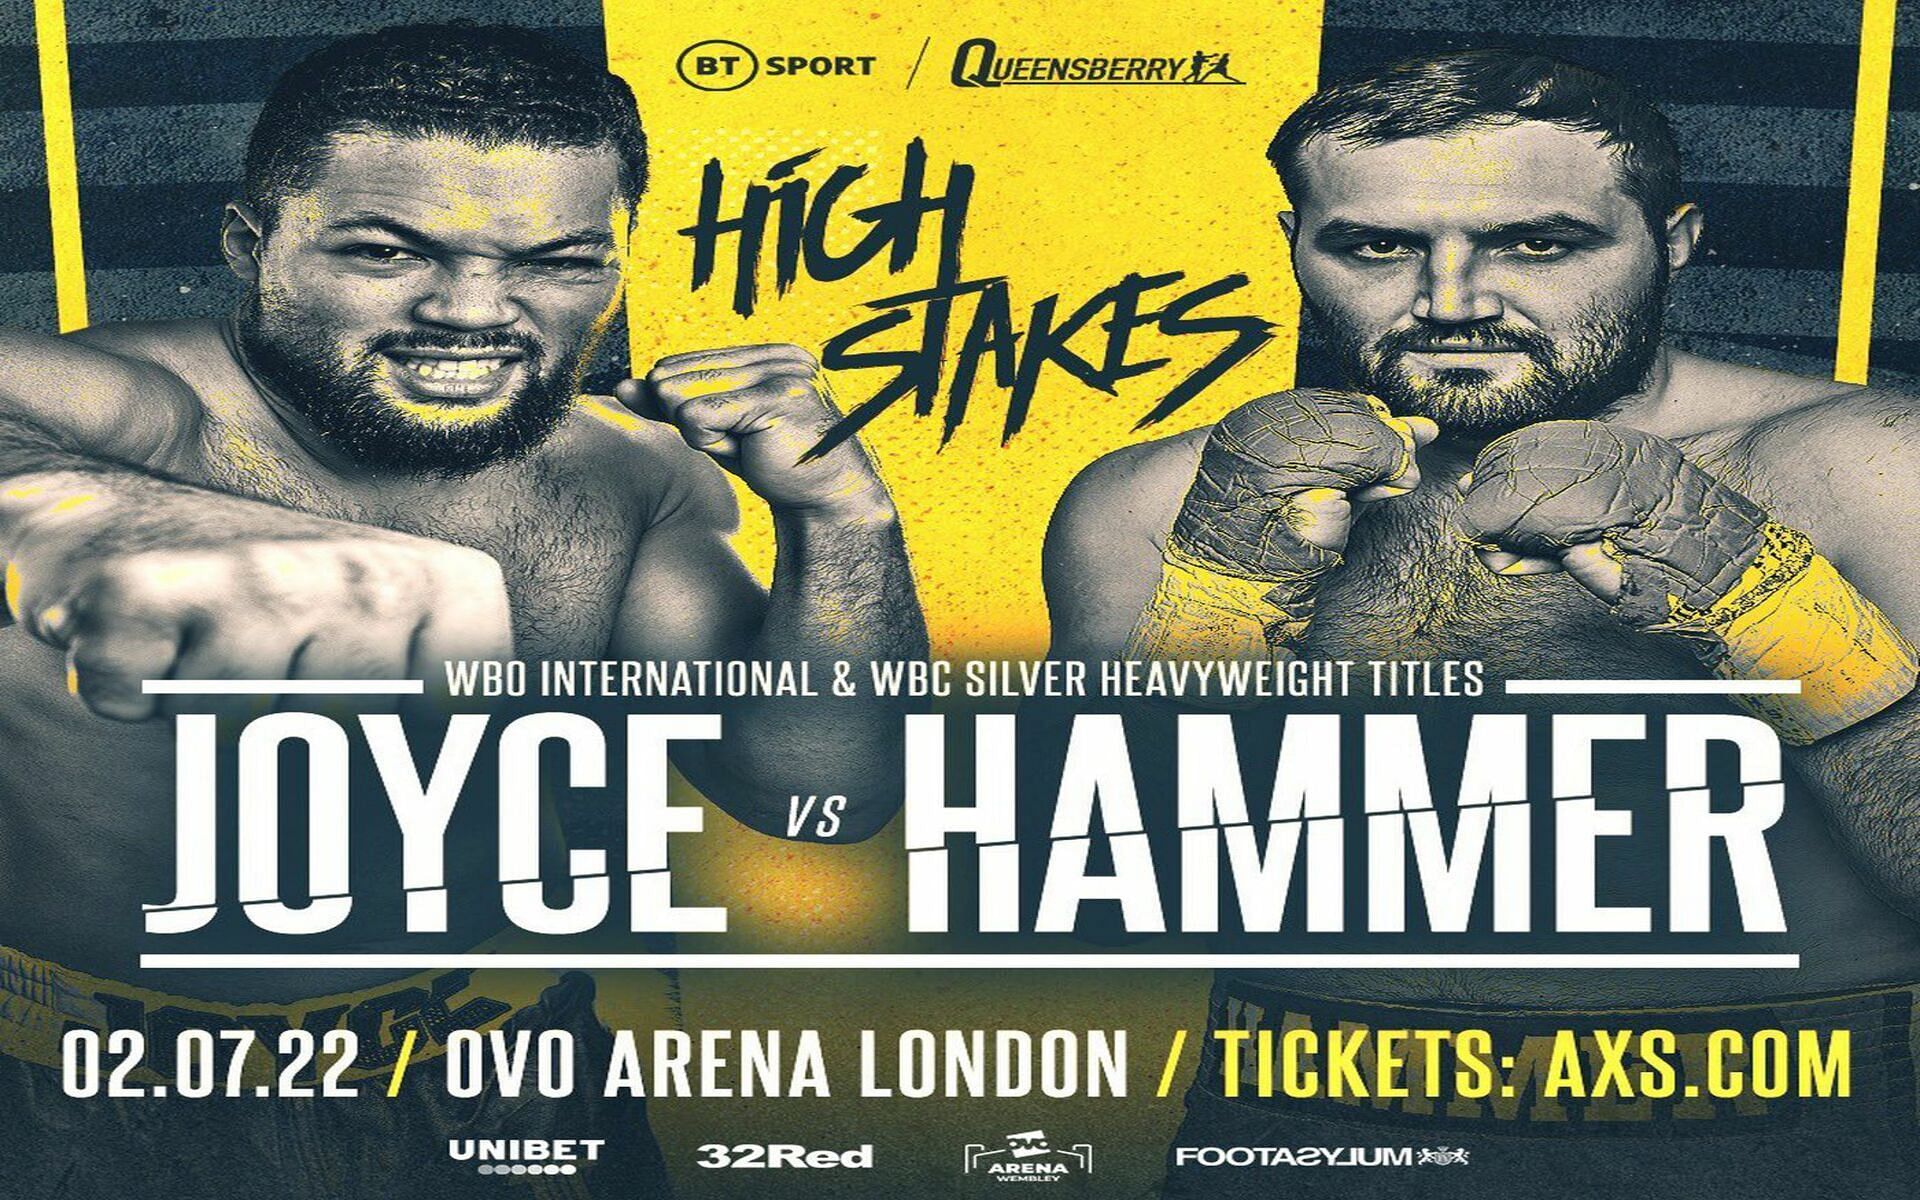 Joe Joyce (L) and Christian Hammer (R) are set to square off later today